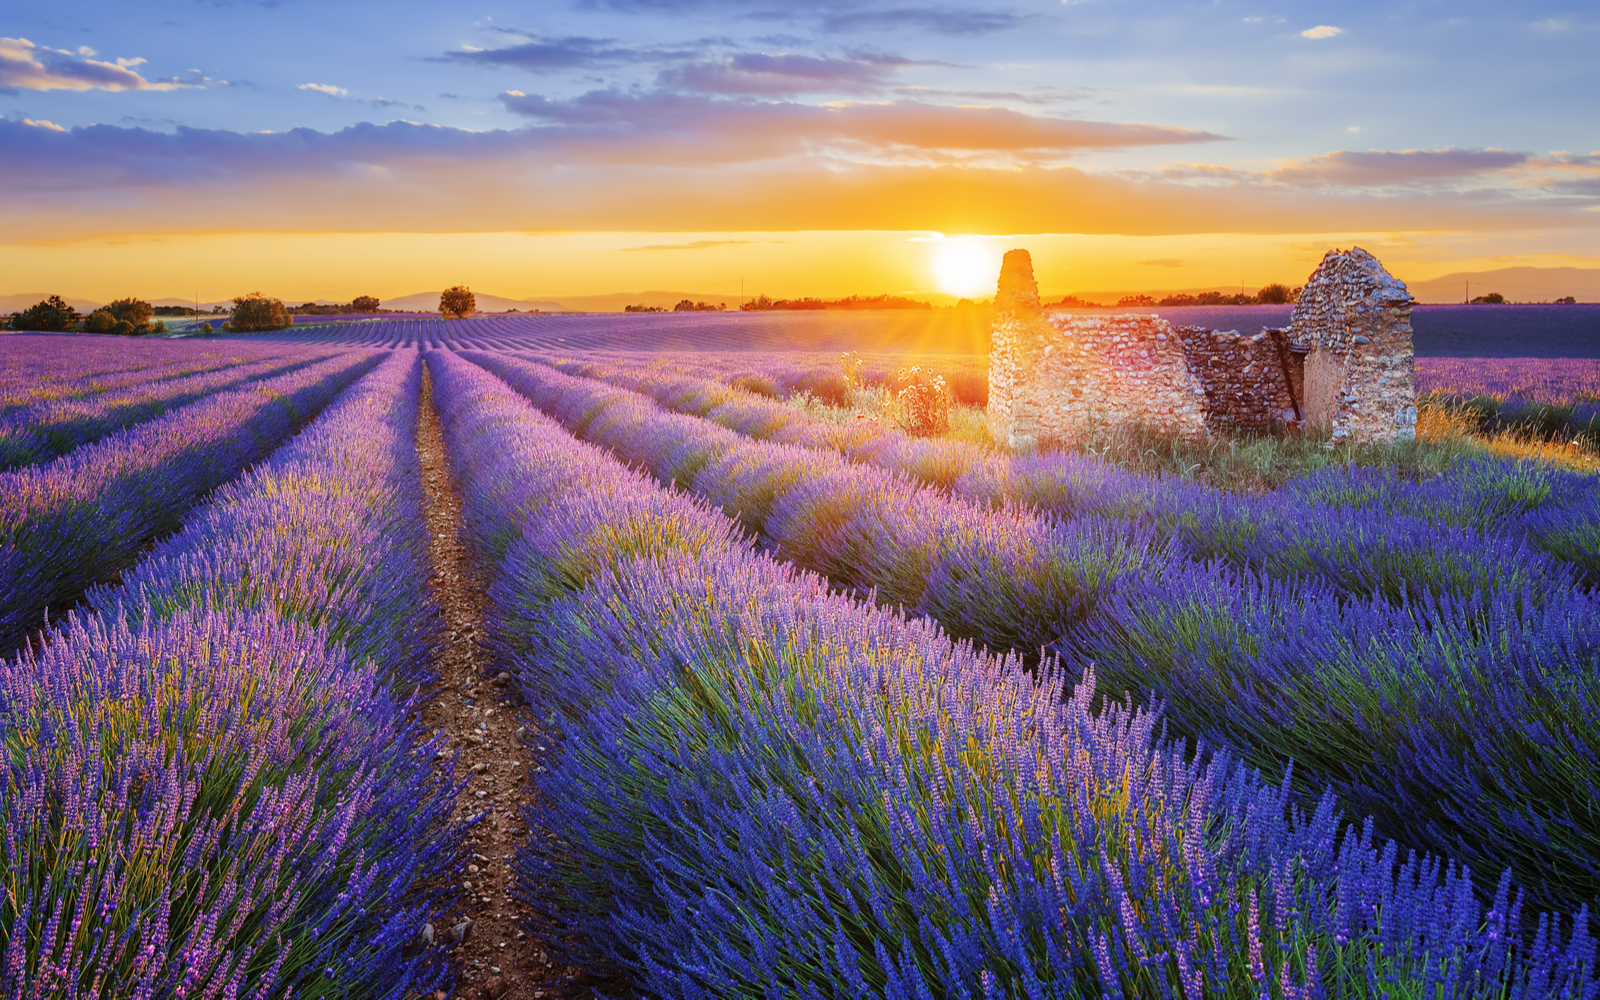 Sun is setting over a beautiful purple lavender filed in Valensole during the best time to visit France